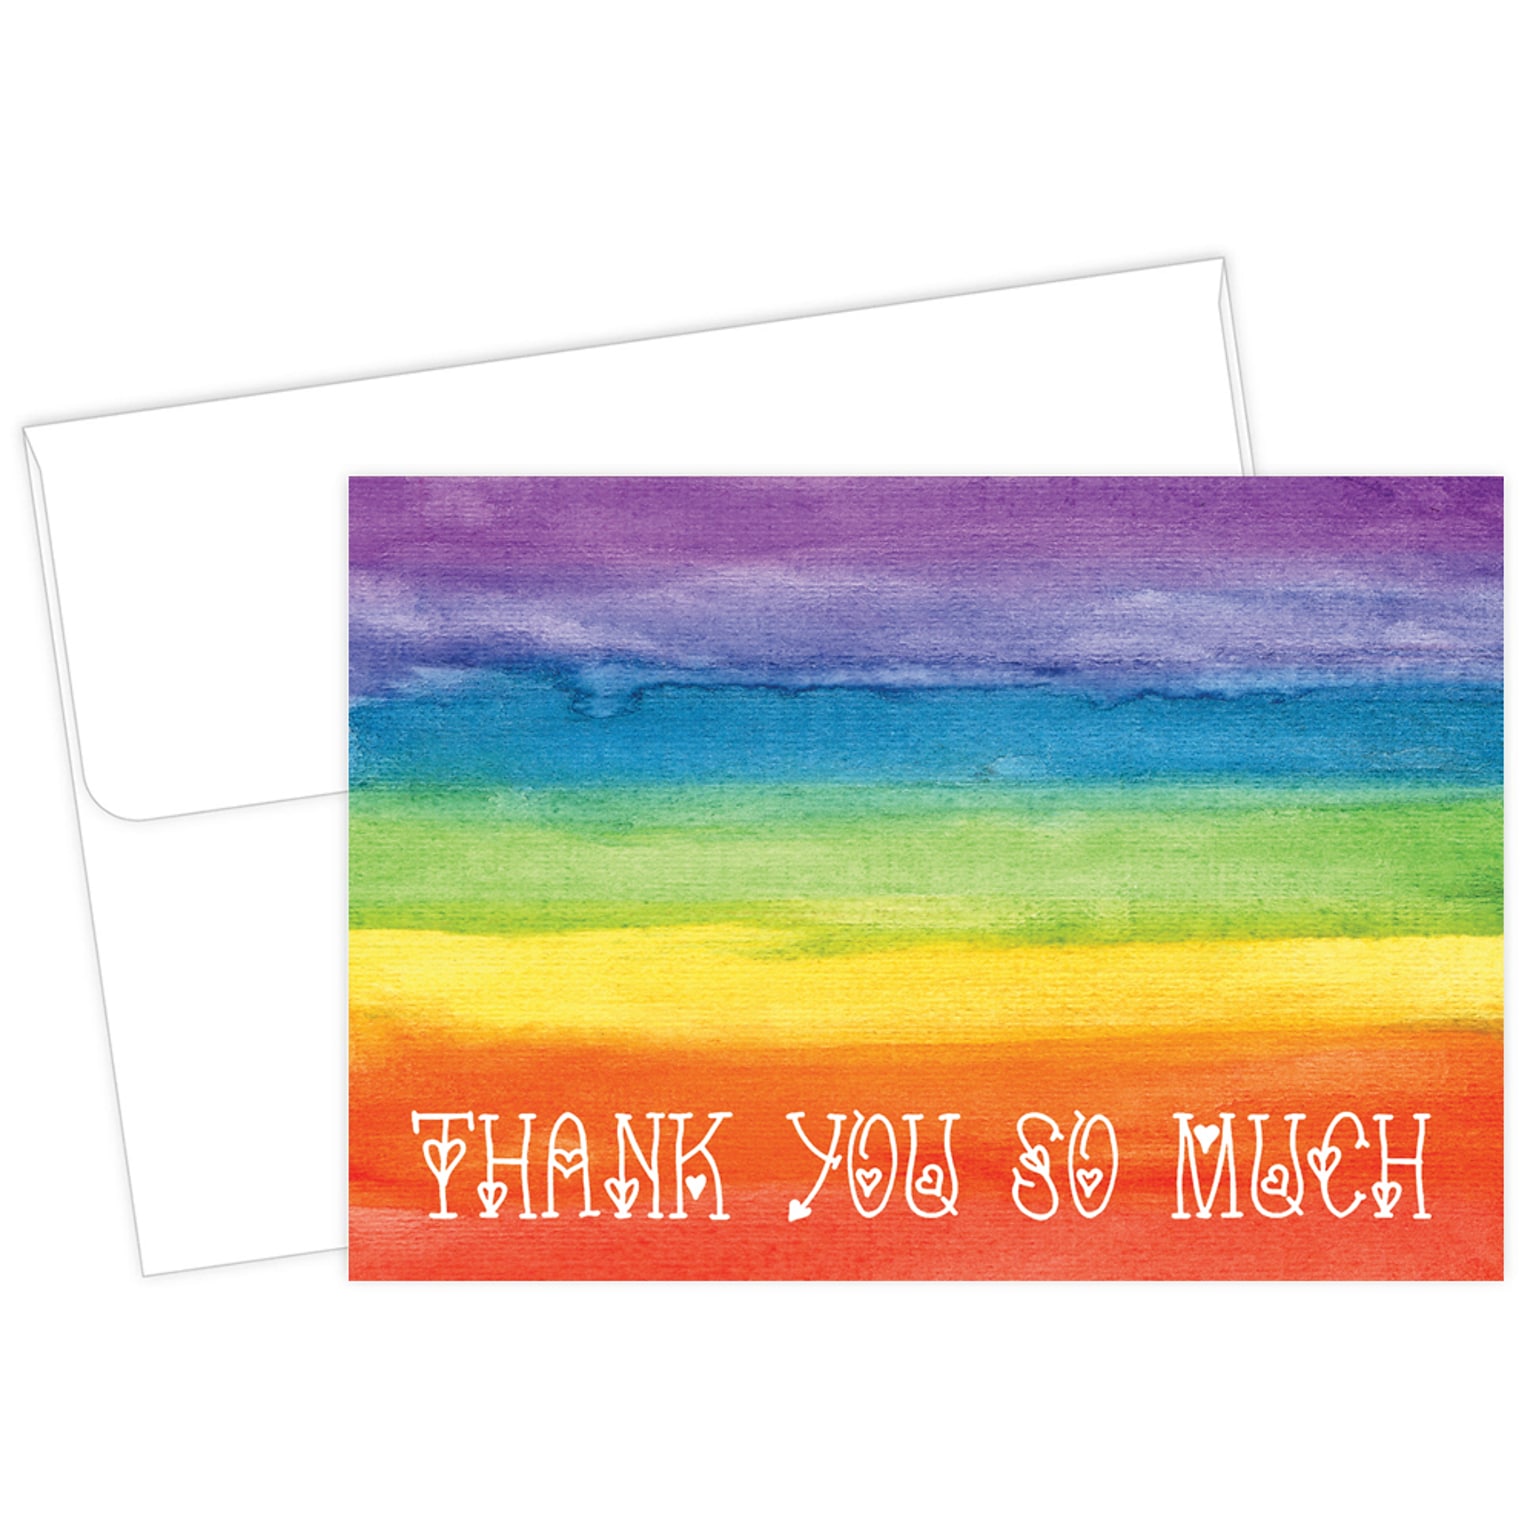 Masterpiece Studios Great Papers!® Rainbow Love Thank You Note Card, 4.875H x 3.35W (folded), 20 count (2017051)